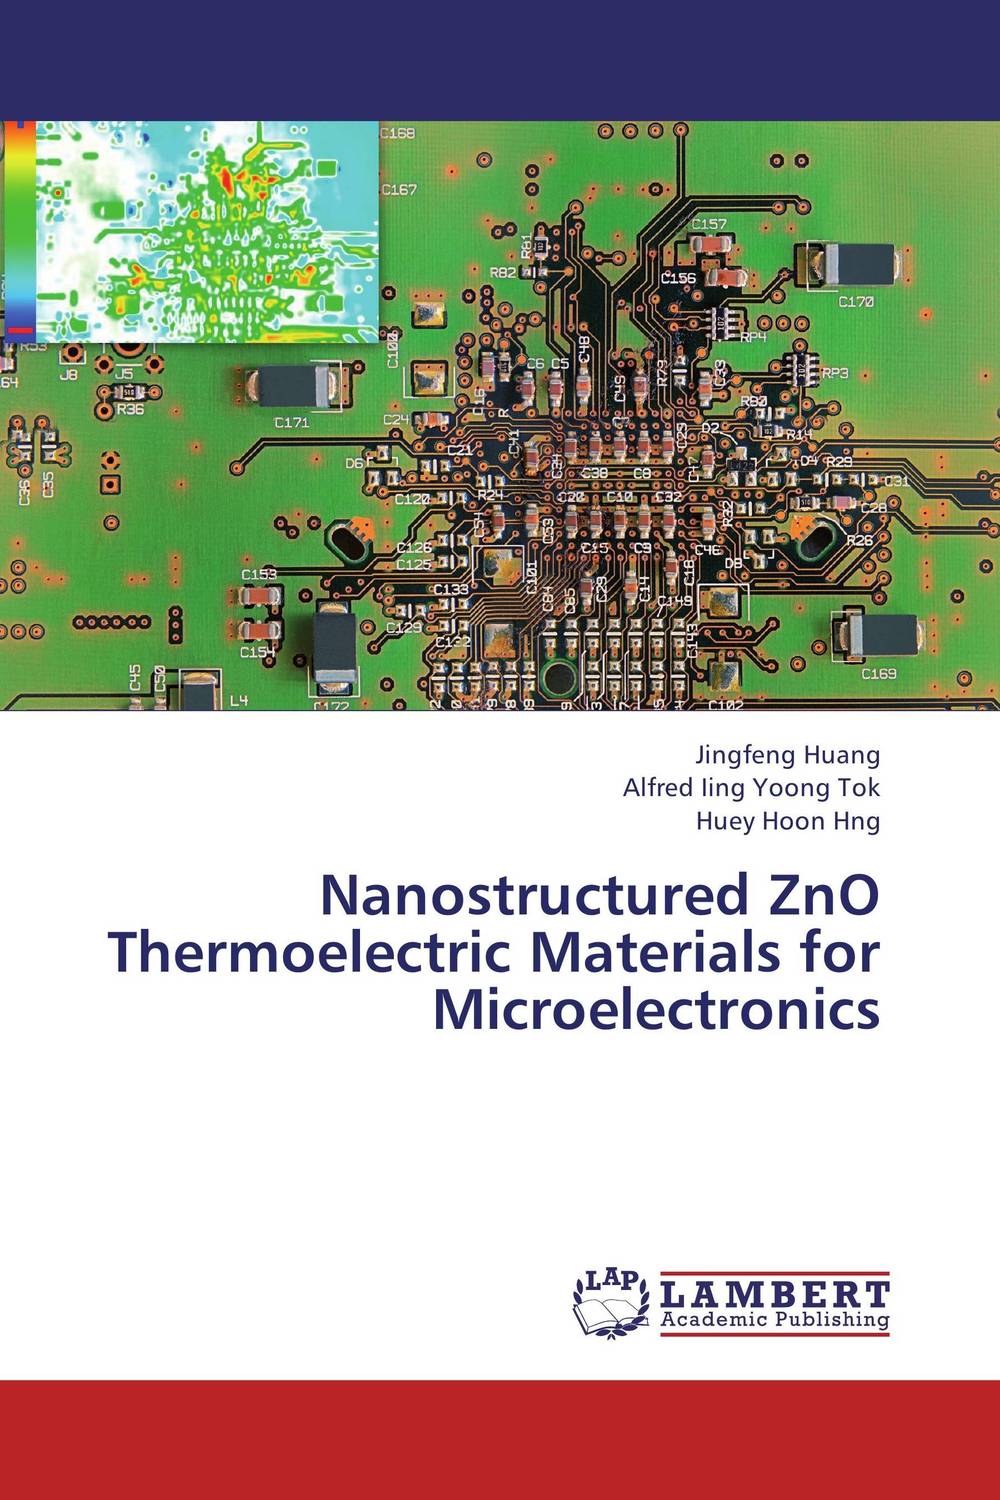 Nanostructured ZnO Thermoelectric Materials for Microelectronics